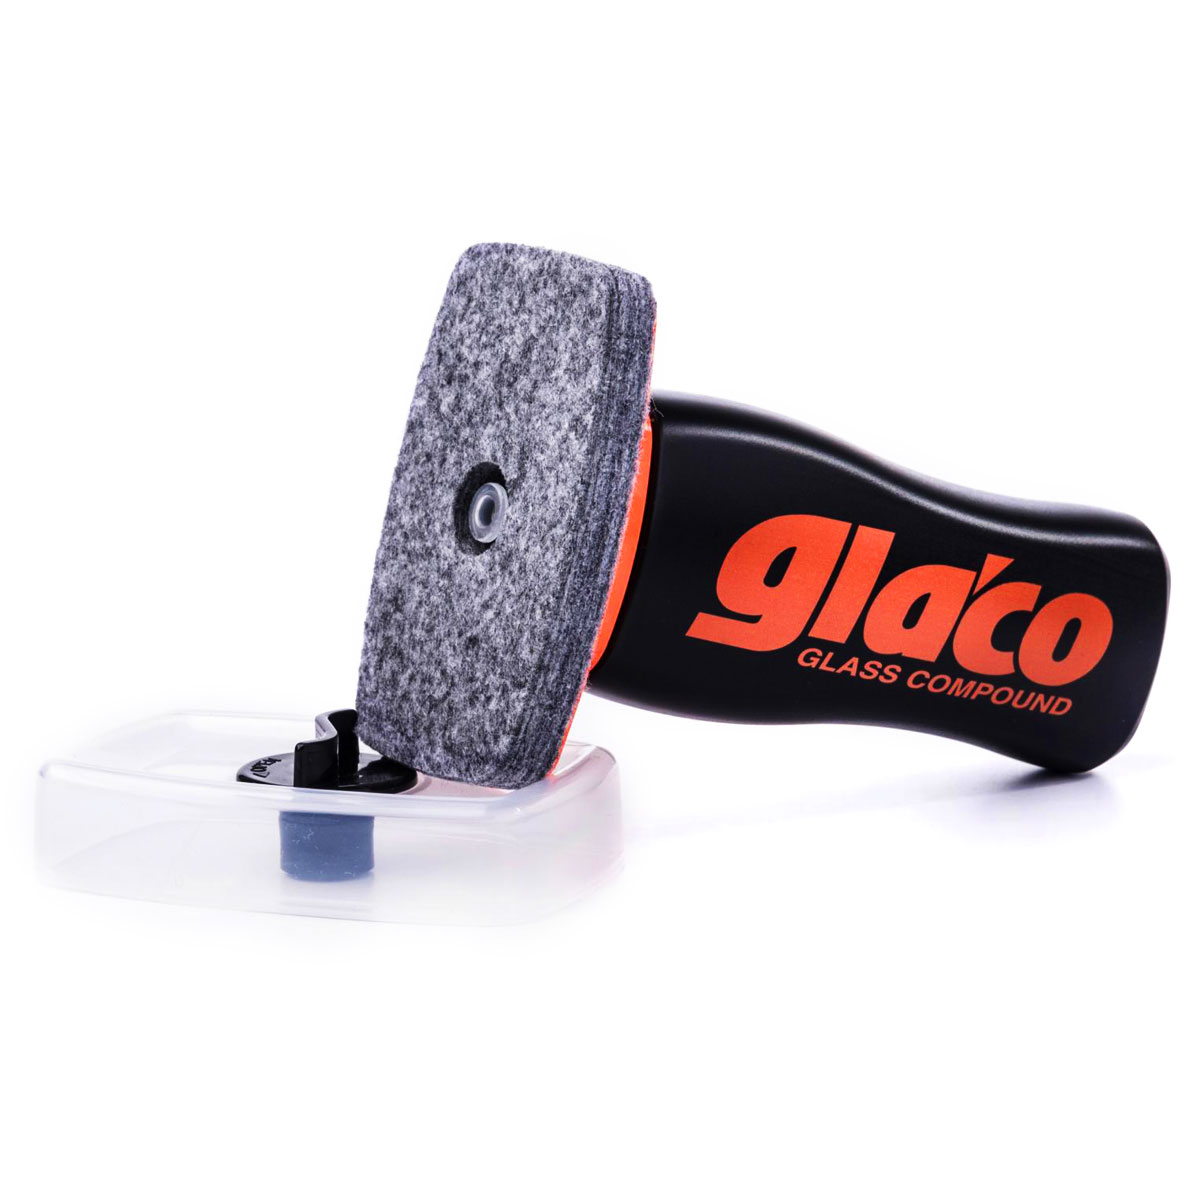 Soft99 Glaco Glass Compound Roll On test - EN 